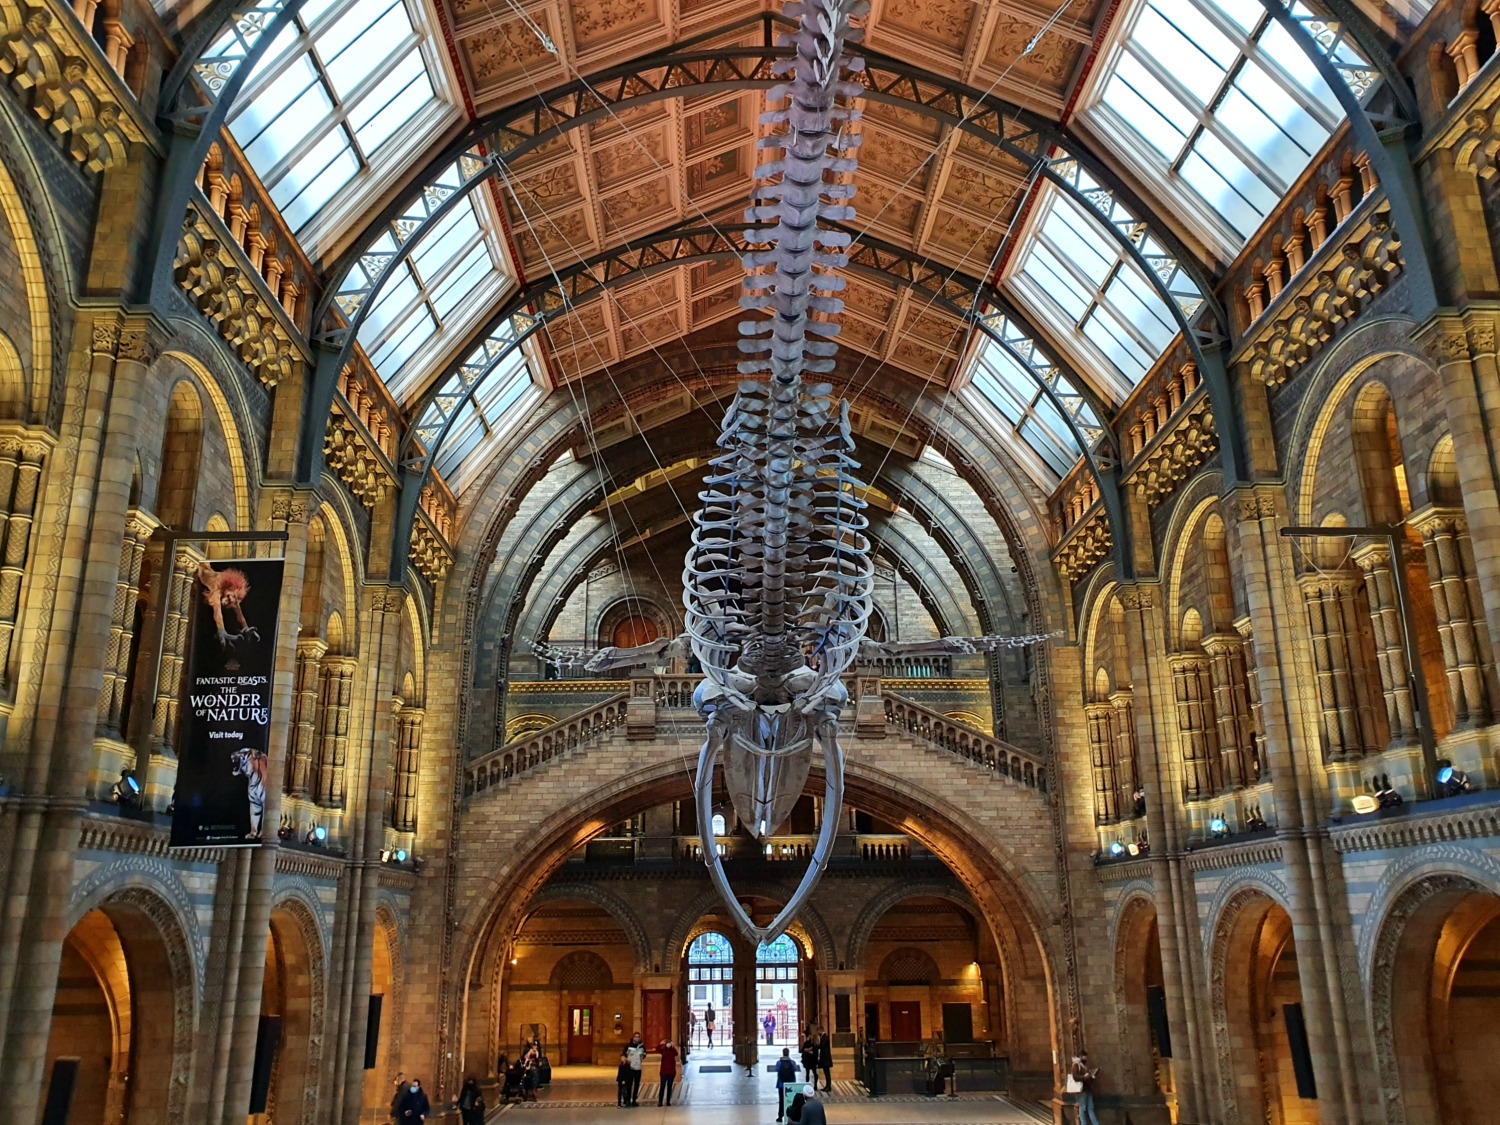 View of the whale skeleton hanging in the Hintze Hall of the Natural History Museum in London - one of the best things to do in London with kids